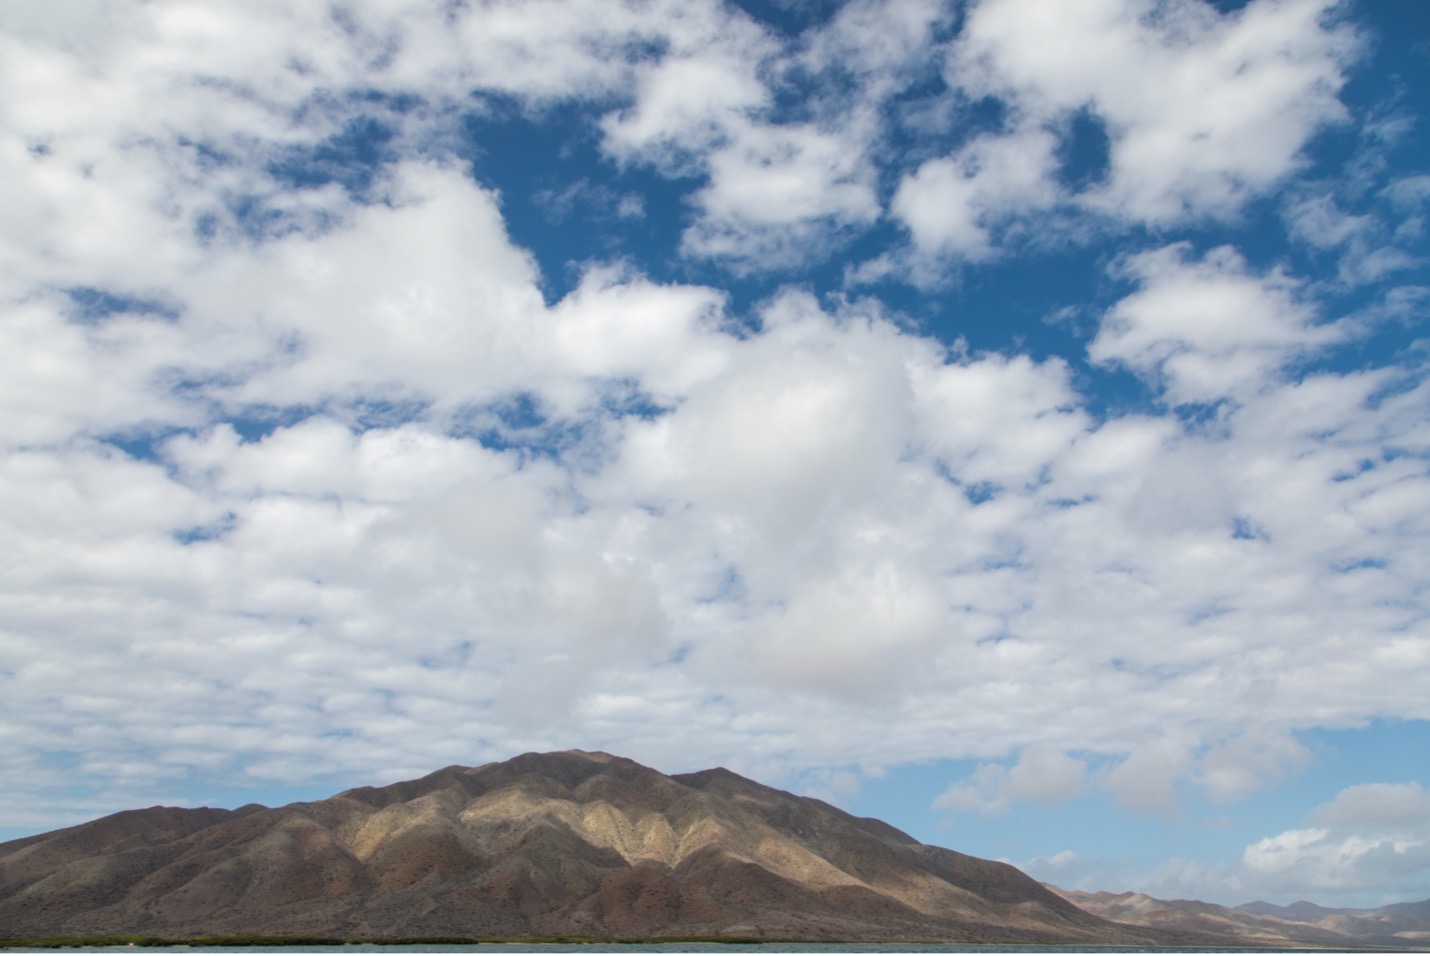 patchy and dramatic clouds above a hill in Baja